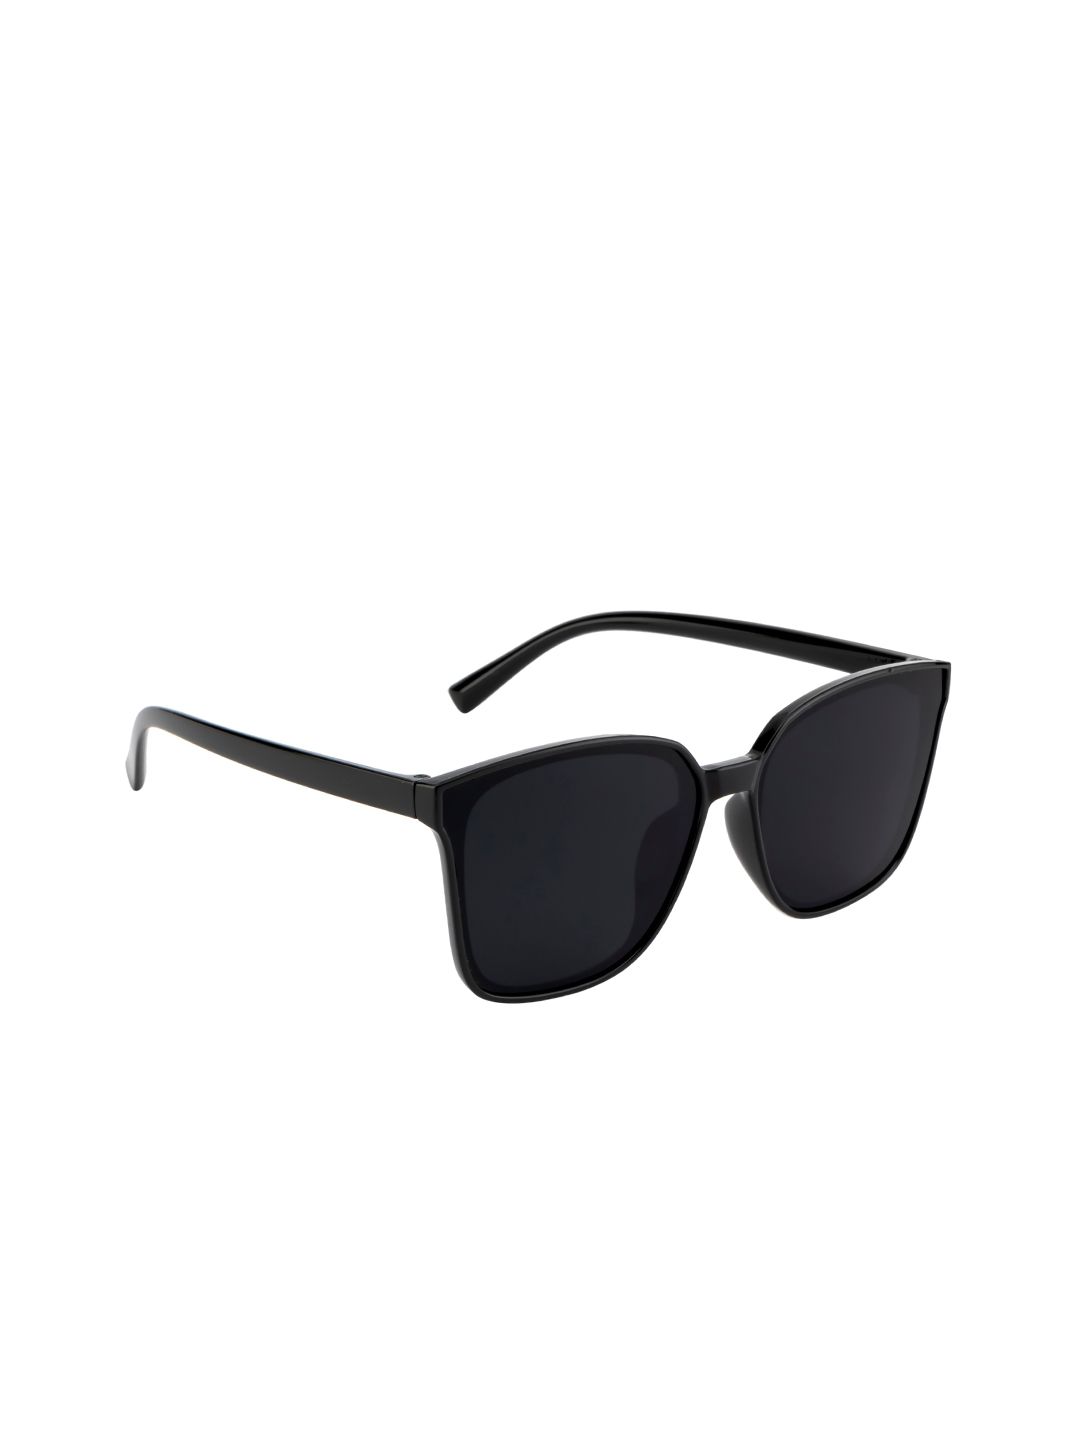 Ted Smith Women Black Lens & Black Square Sunglasses with UV Protected Lens TS-EYEPLAY Price in India